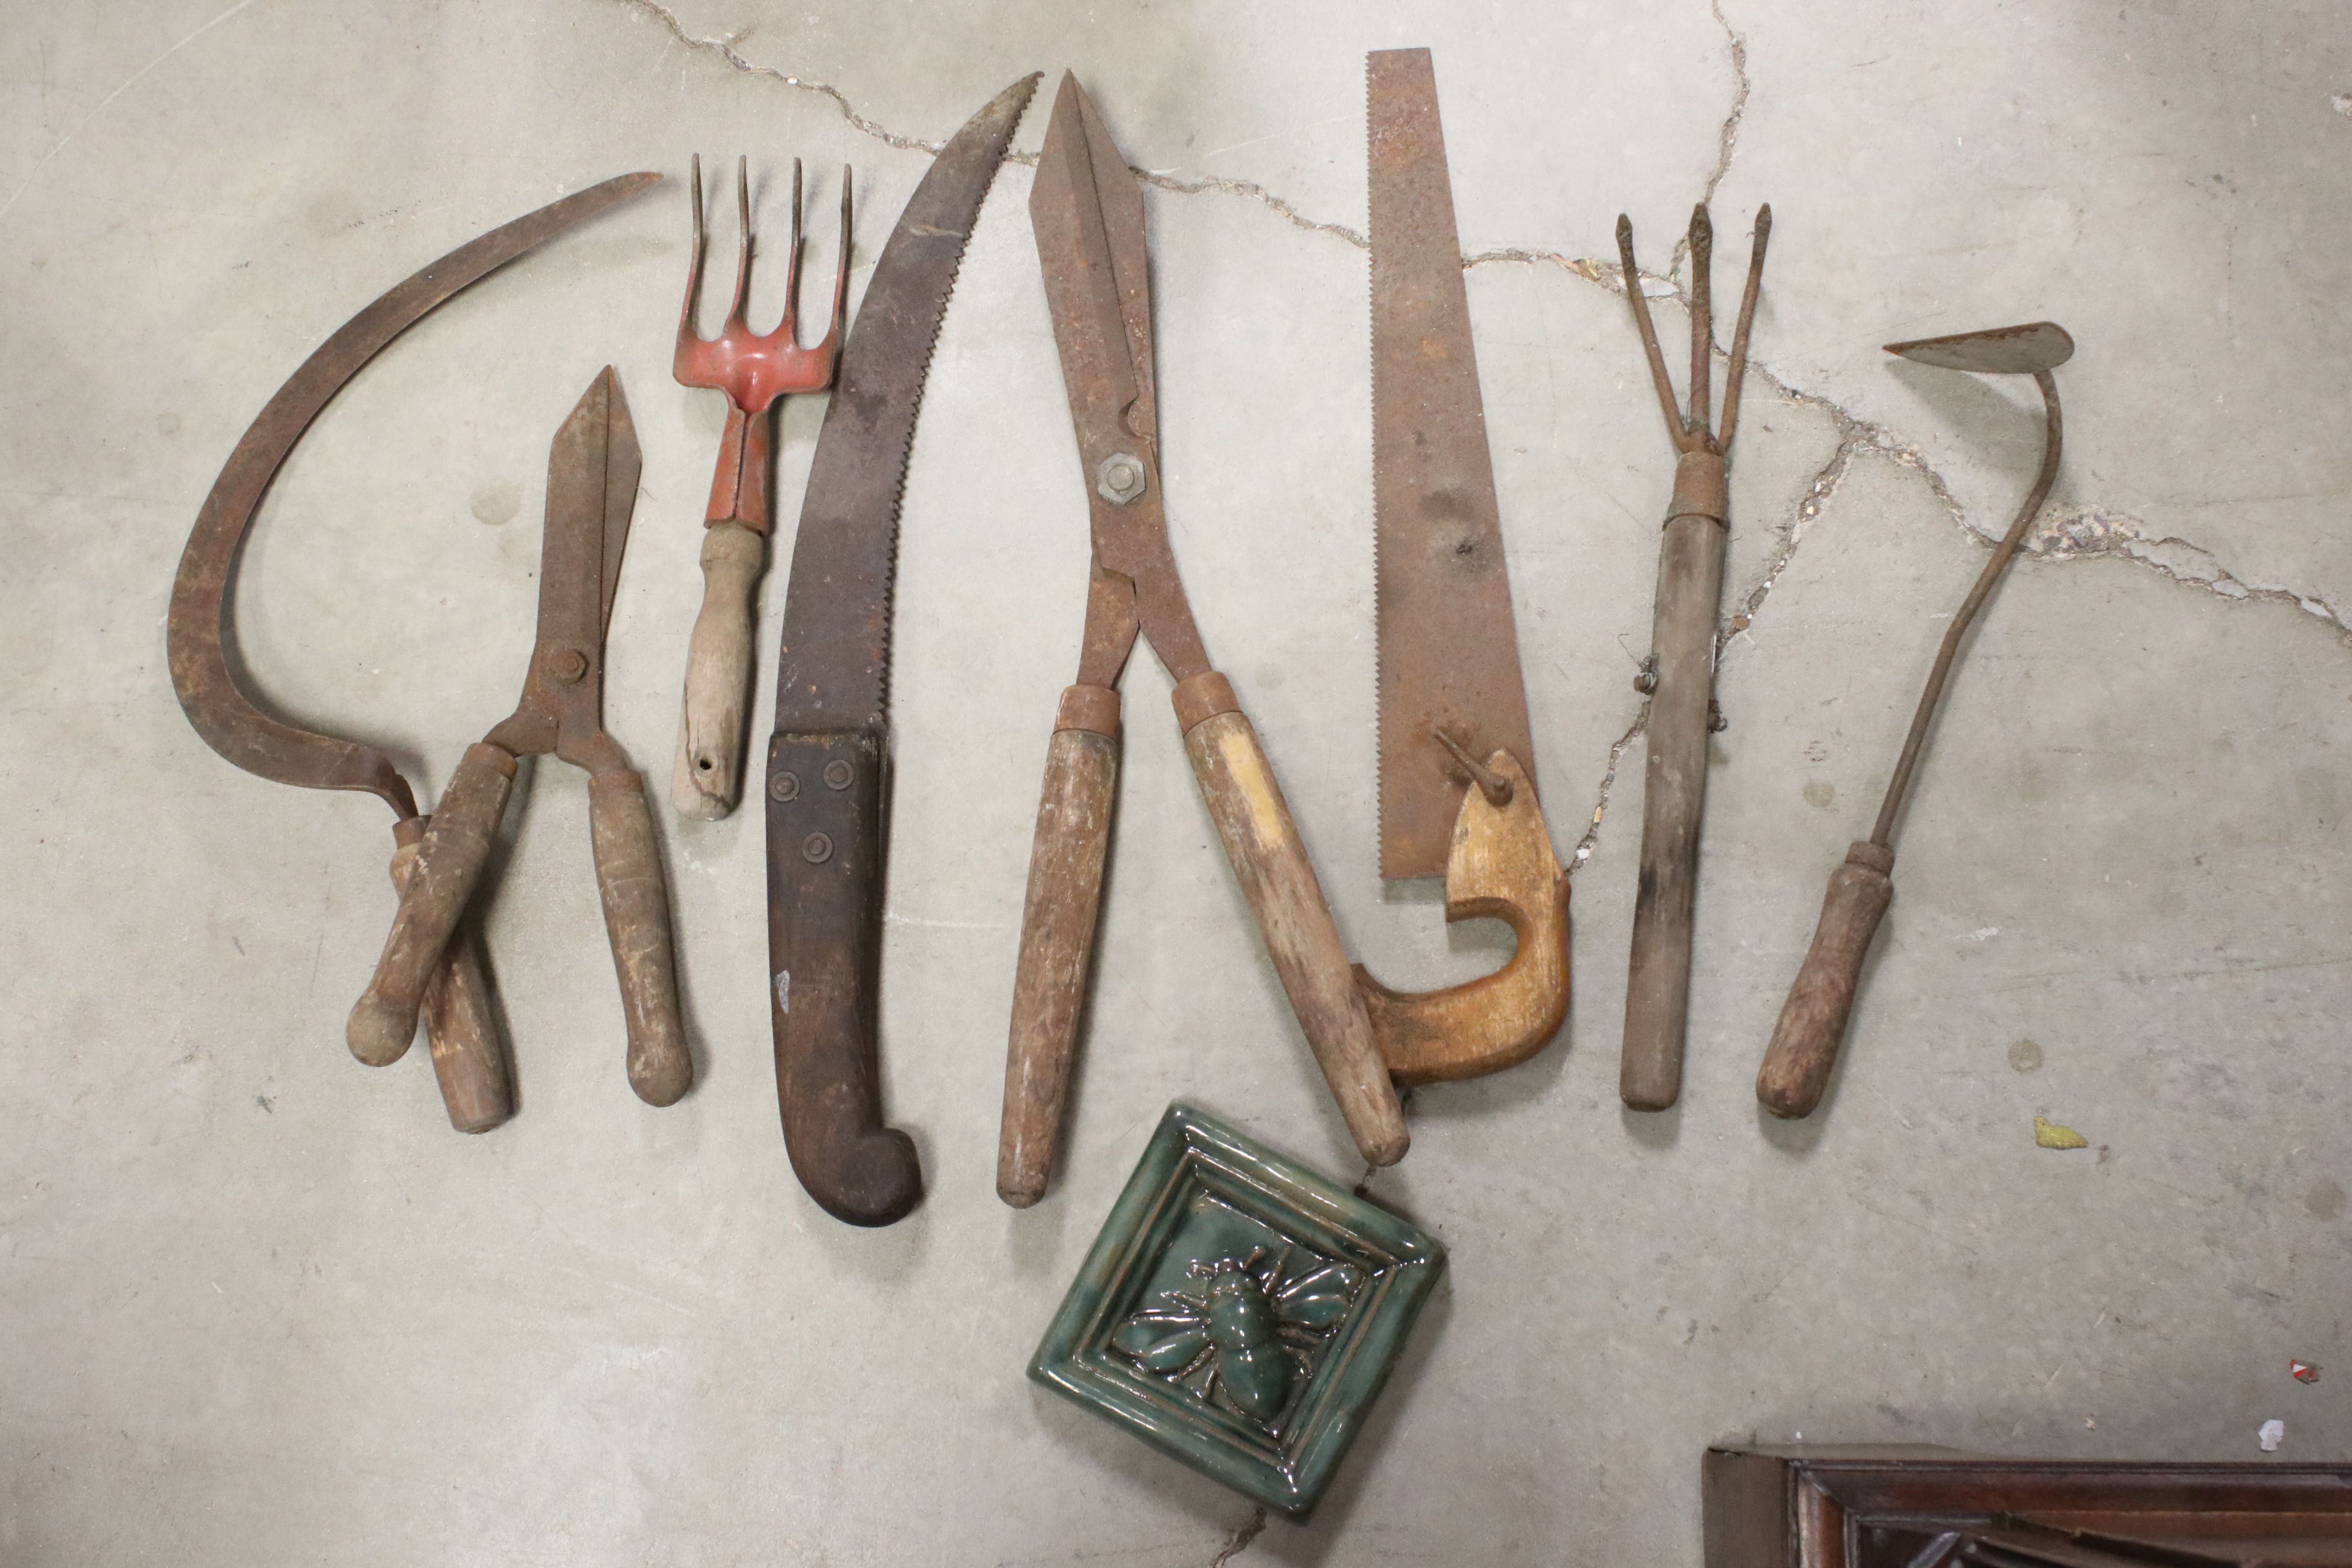 A small group of vintage gardening tools to include shears and saws.